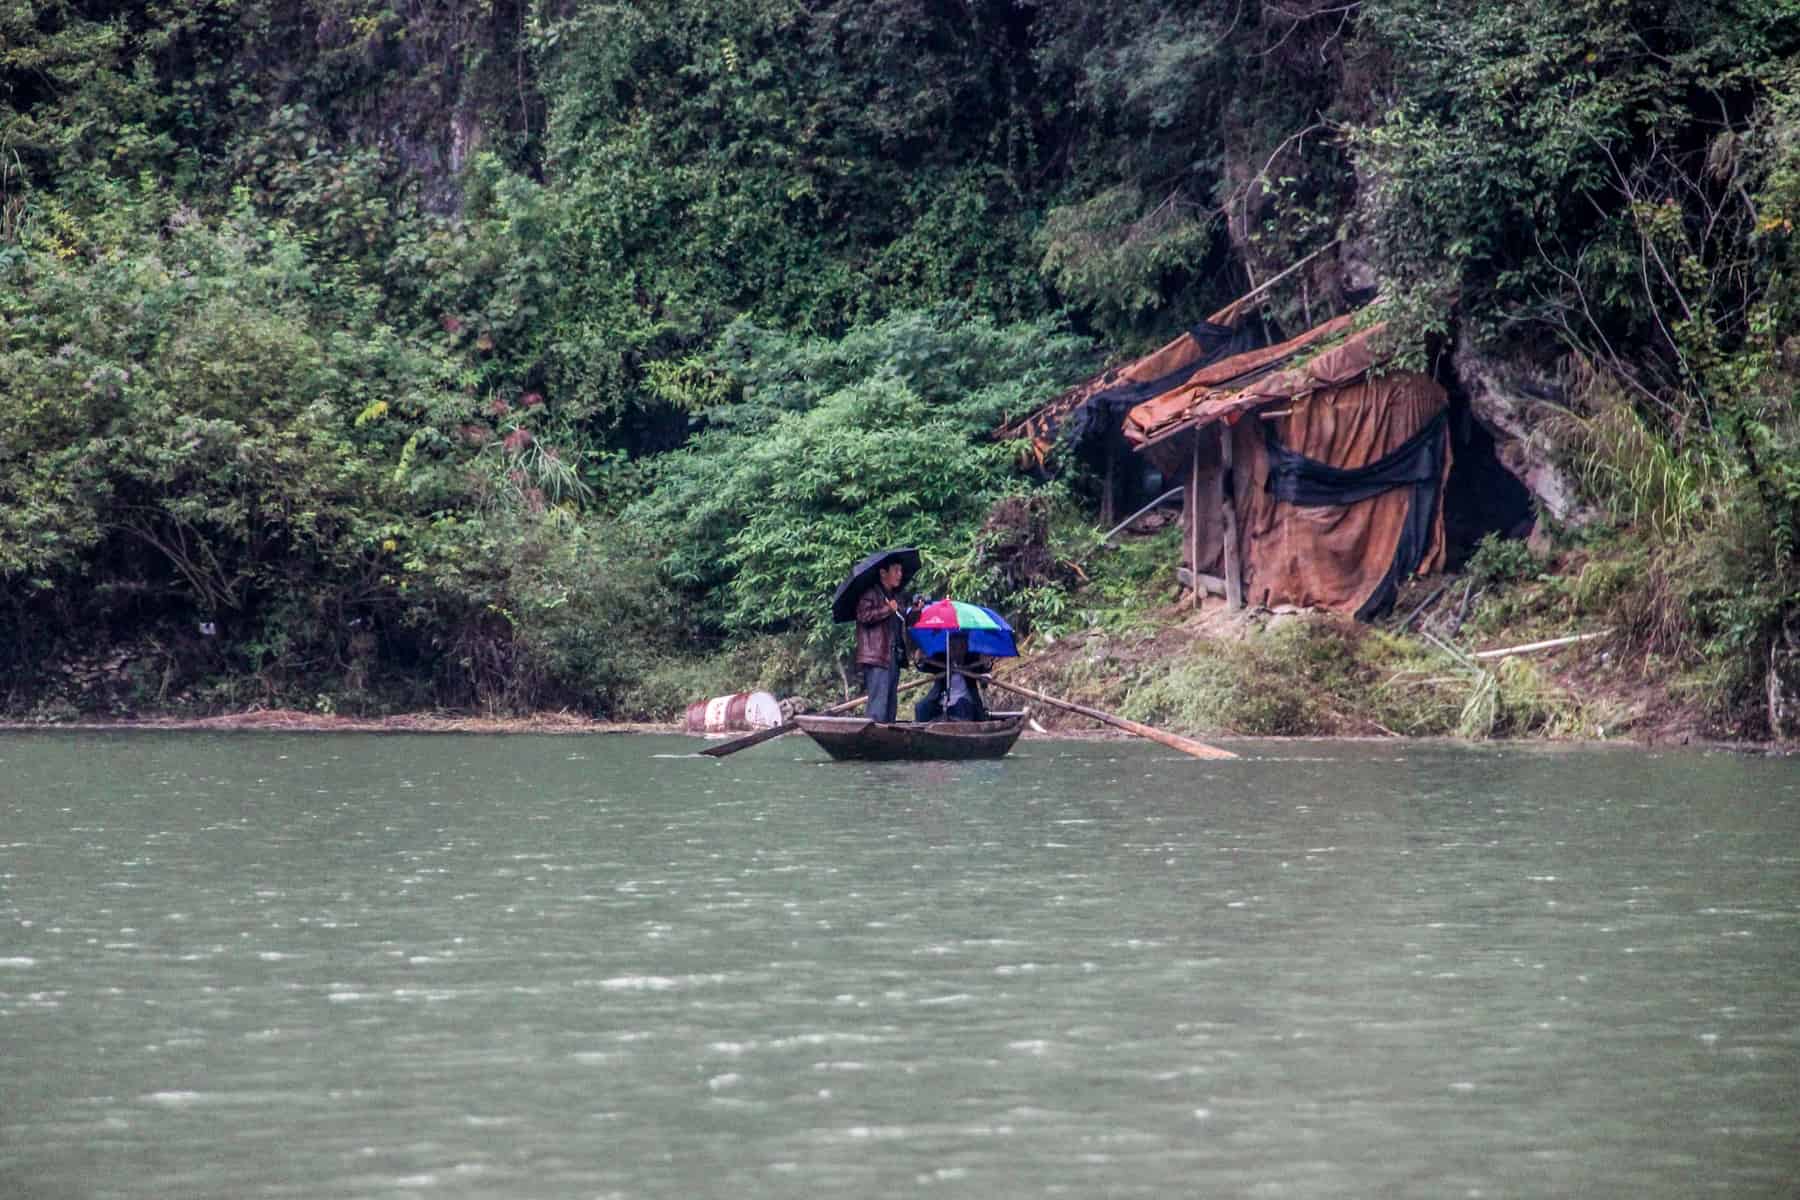 Two Chinese men on a small wooden boat on the Yangtze River while its raining